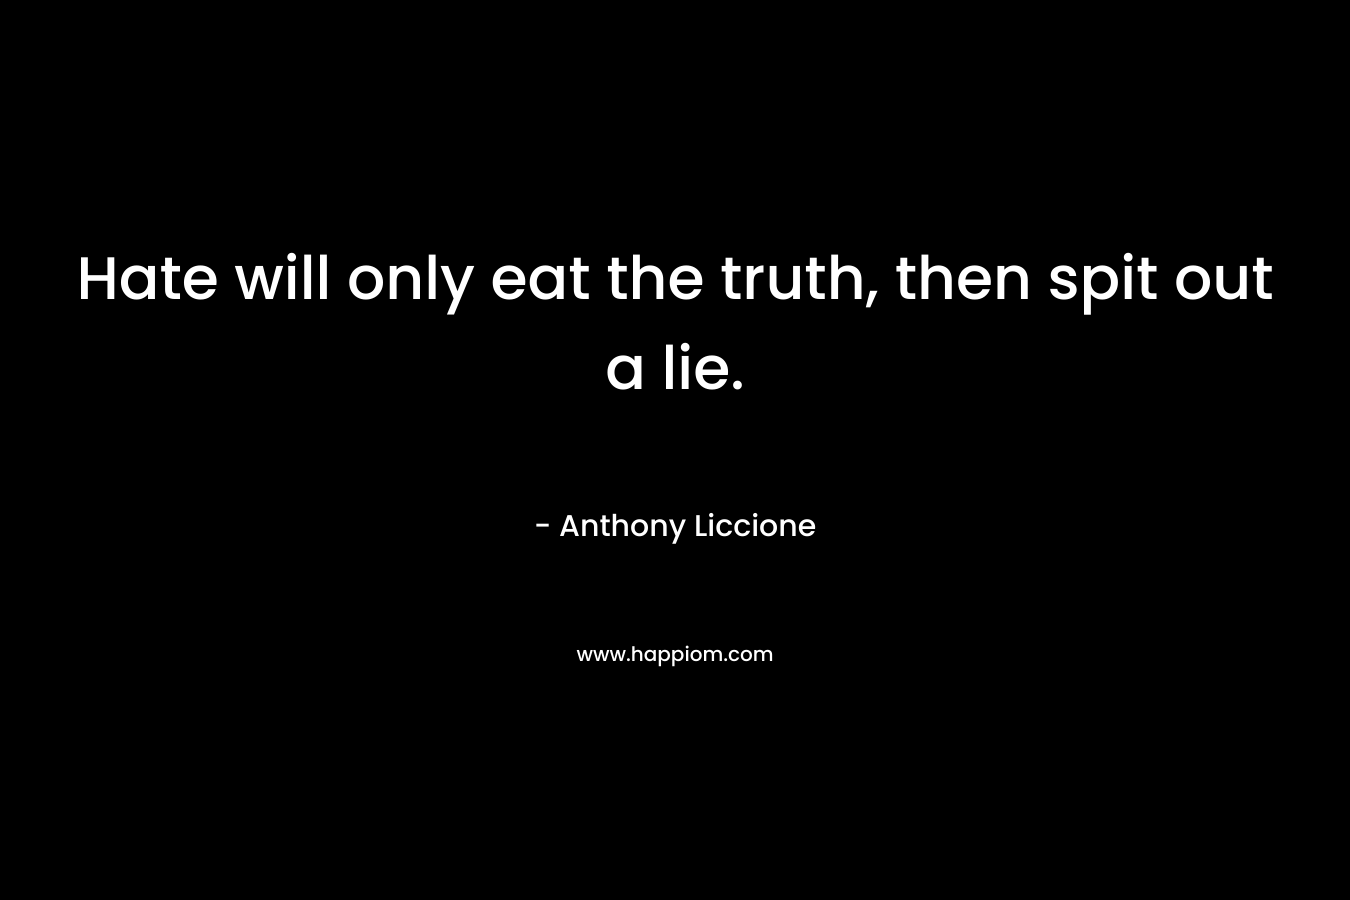 Hate will only eat the truth, then spit out a lie. – Anthony Liccione